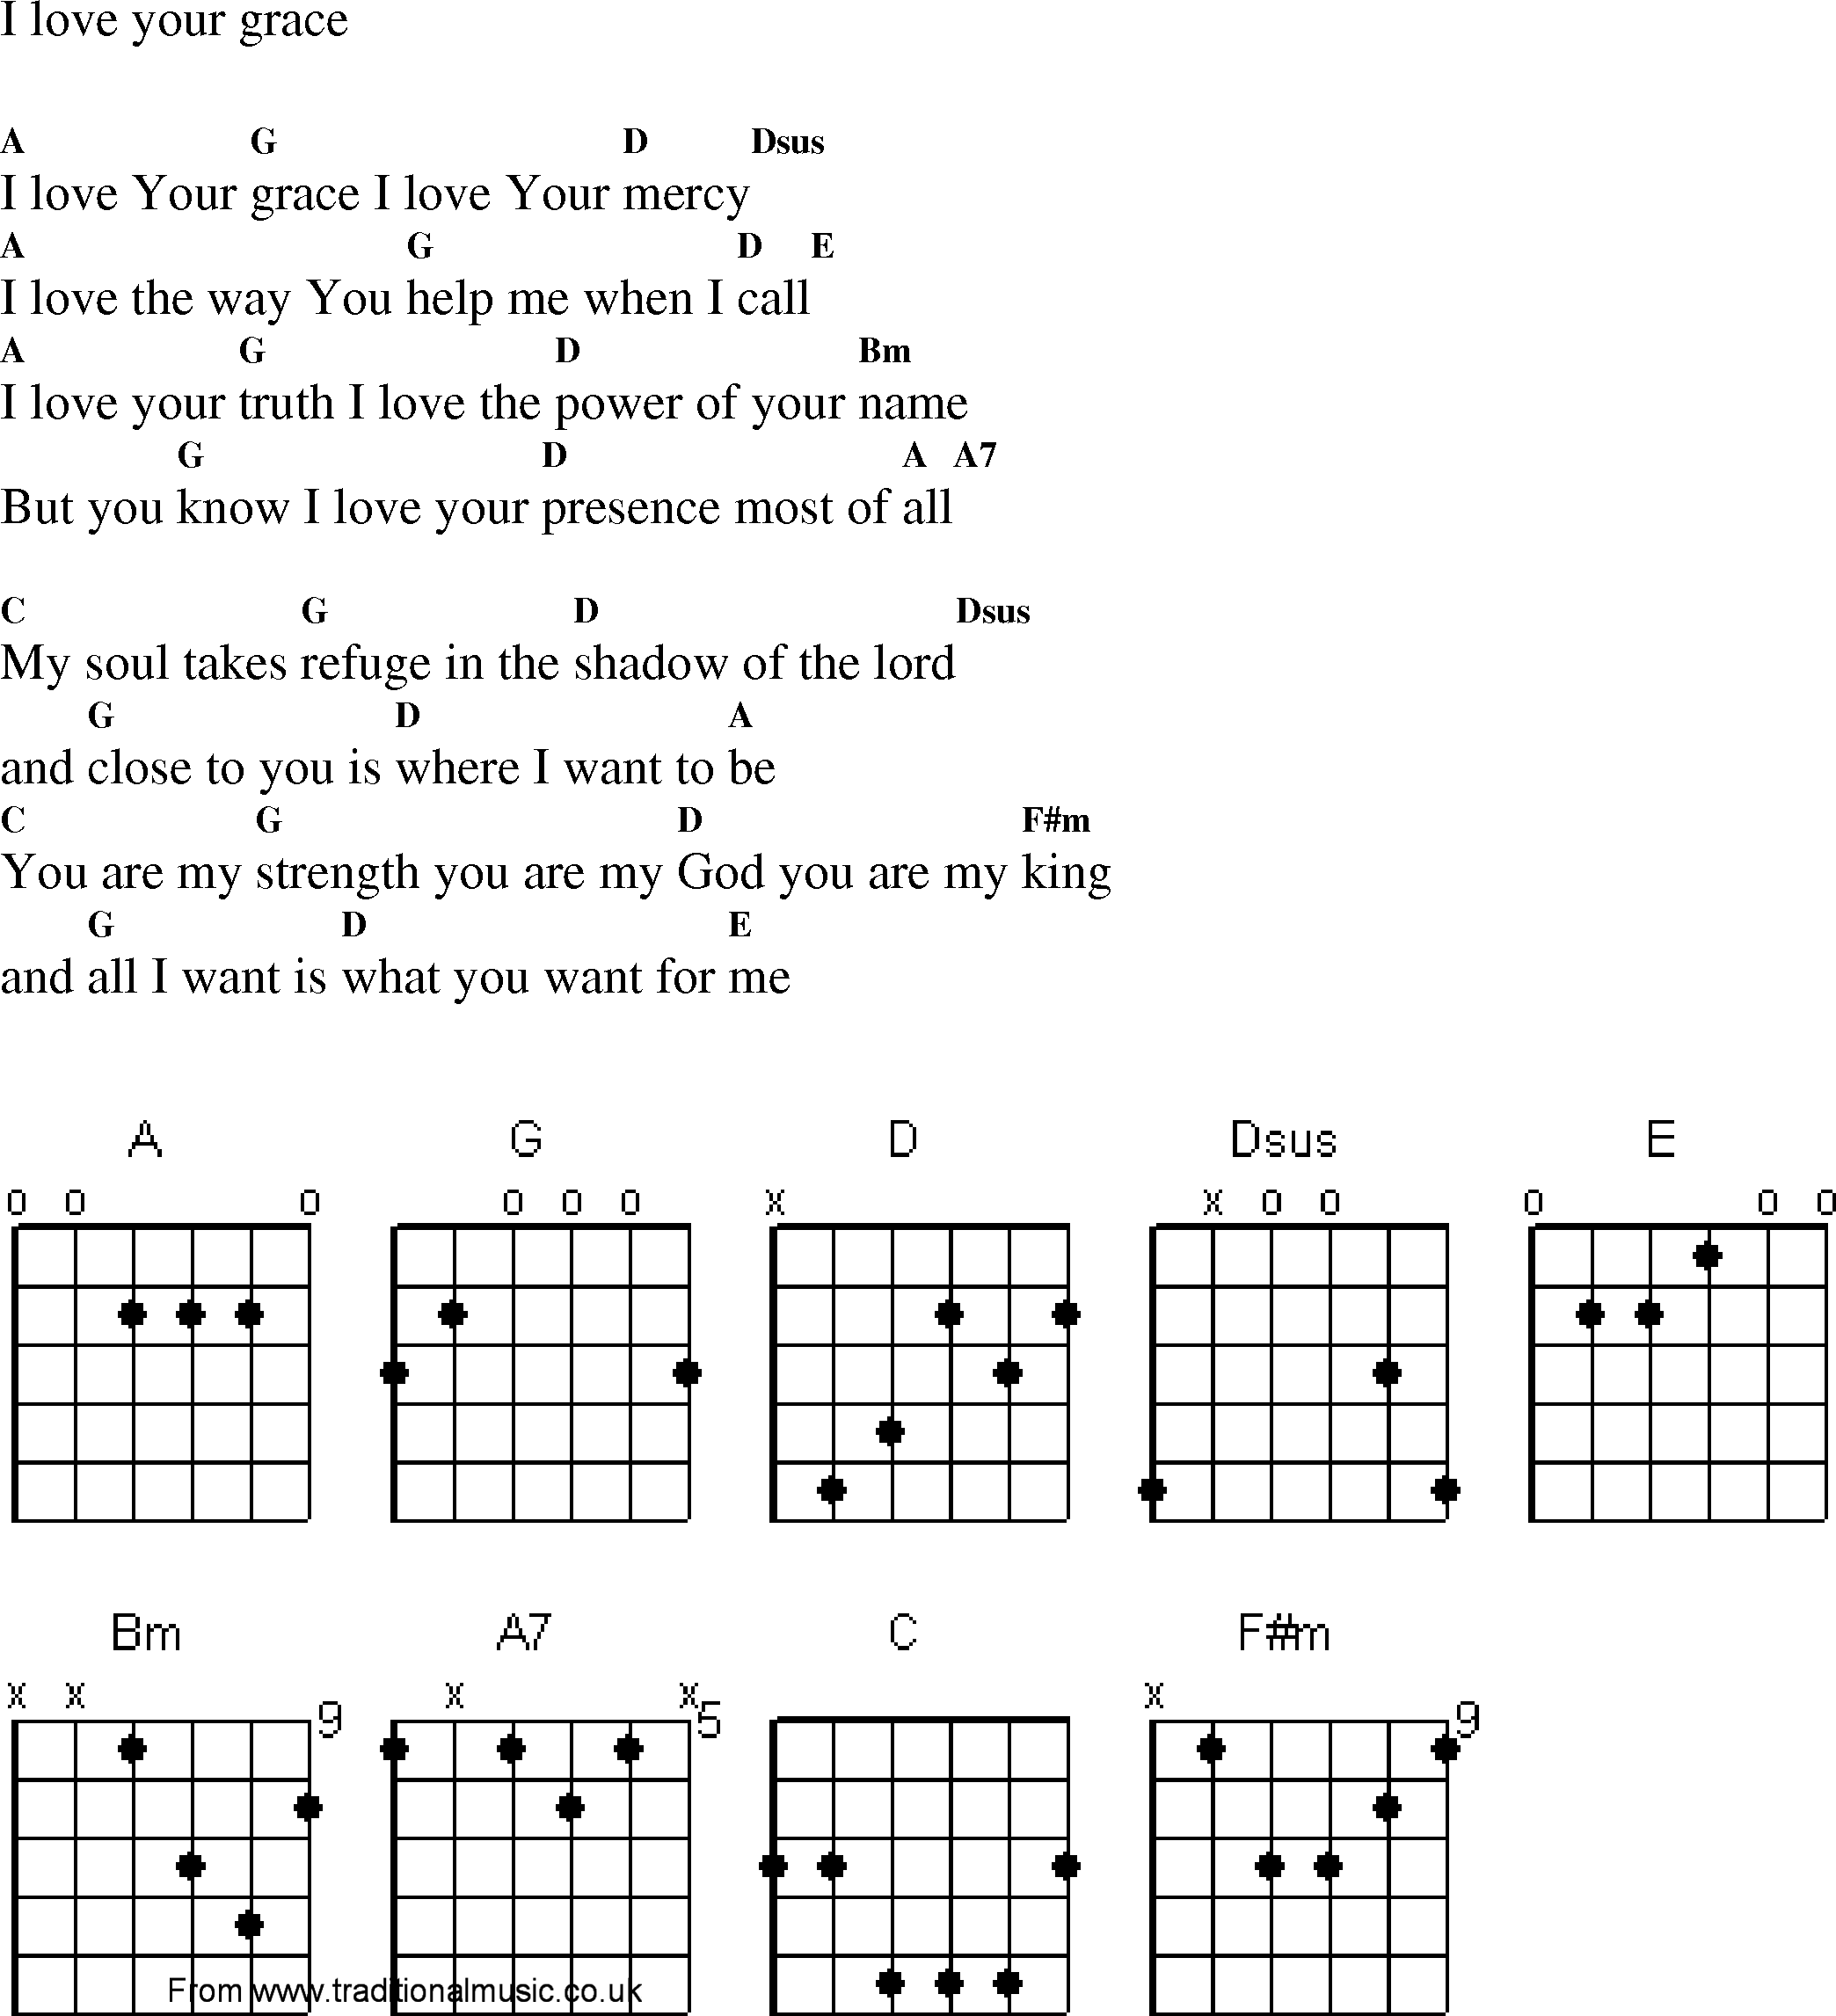 Gospel Song: i_love_your_grace, lyrics and chords.